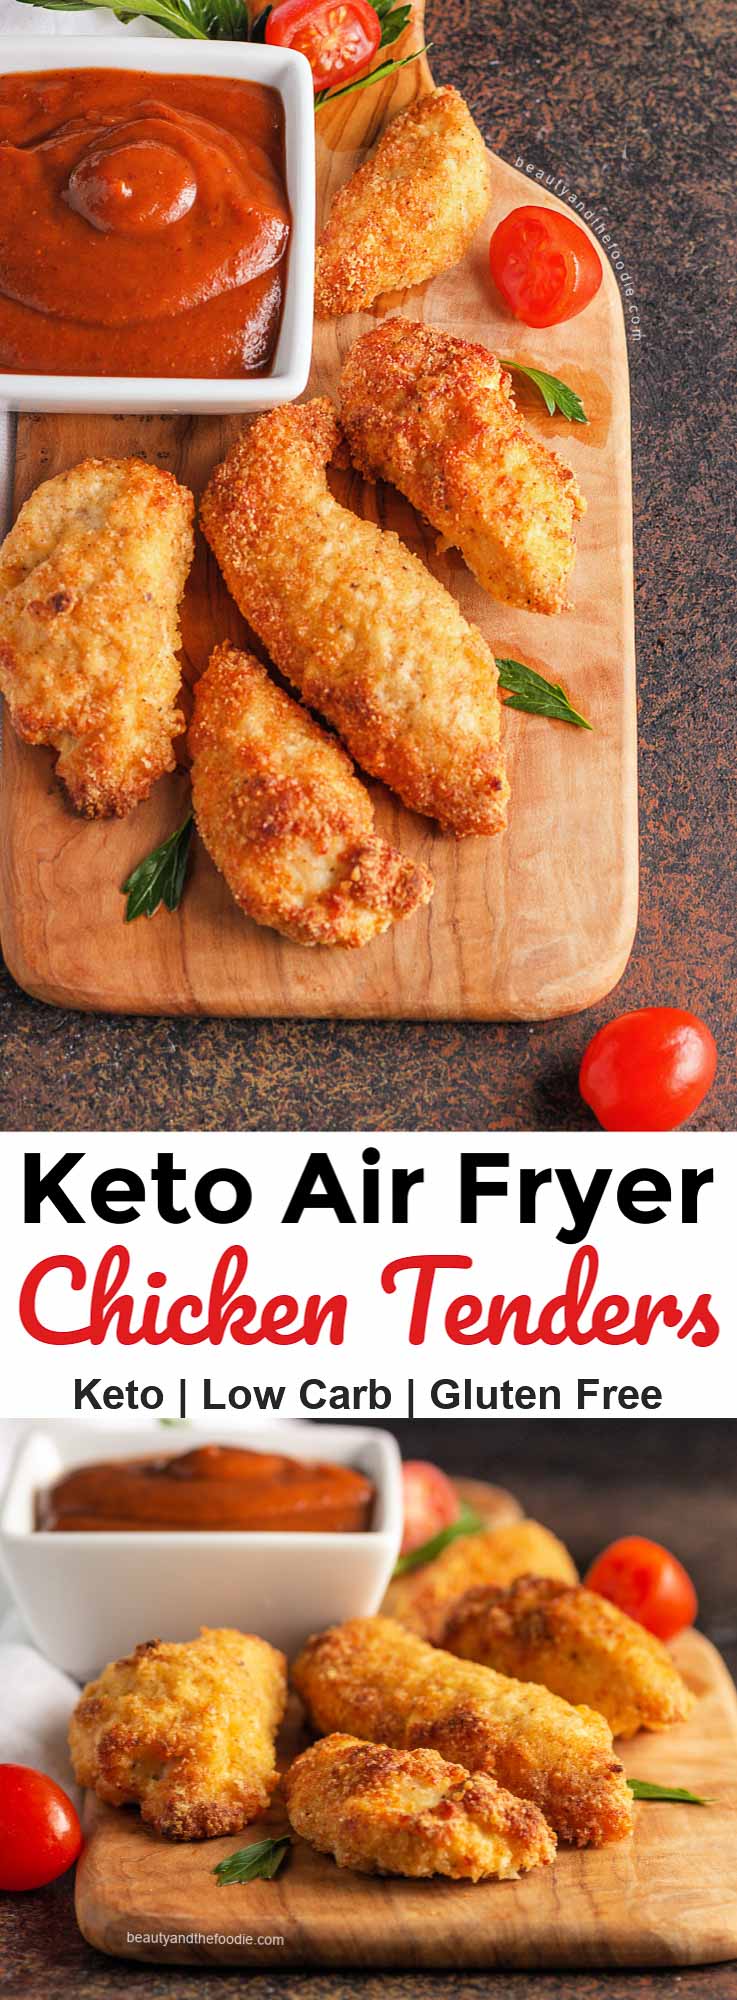 Keto Chicken Tender with air fryer & oven baked directions.